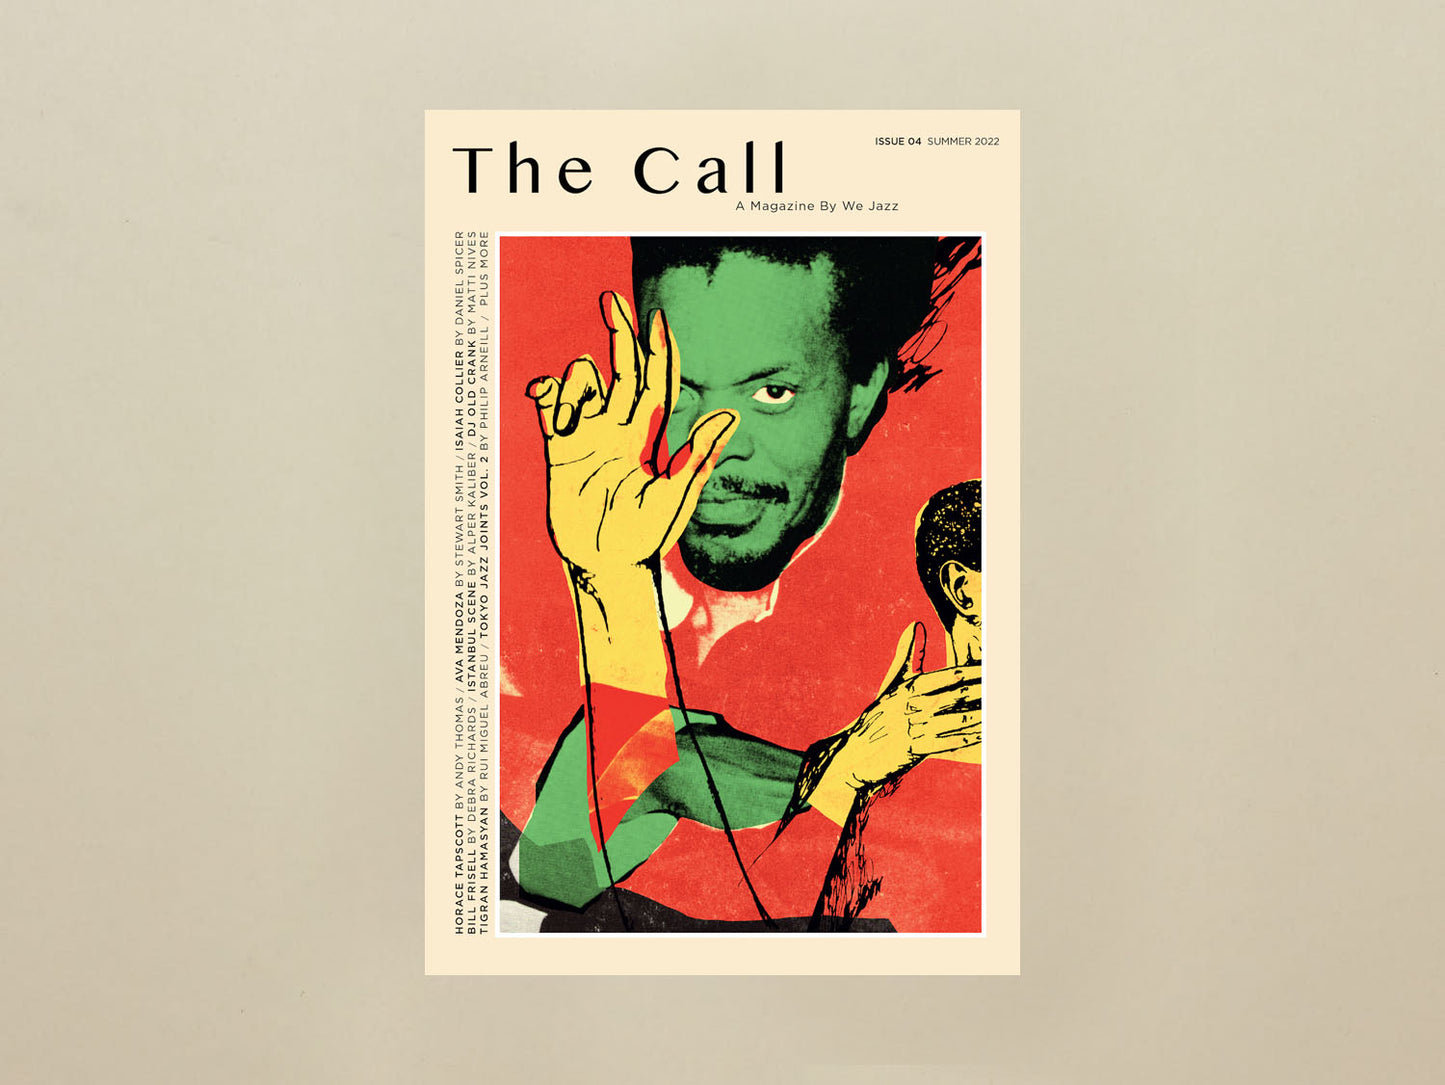 We Jazz Issue 4 Summer 2022 The Call